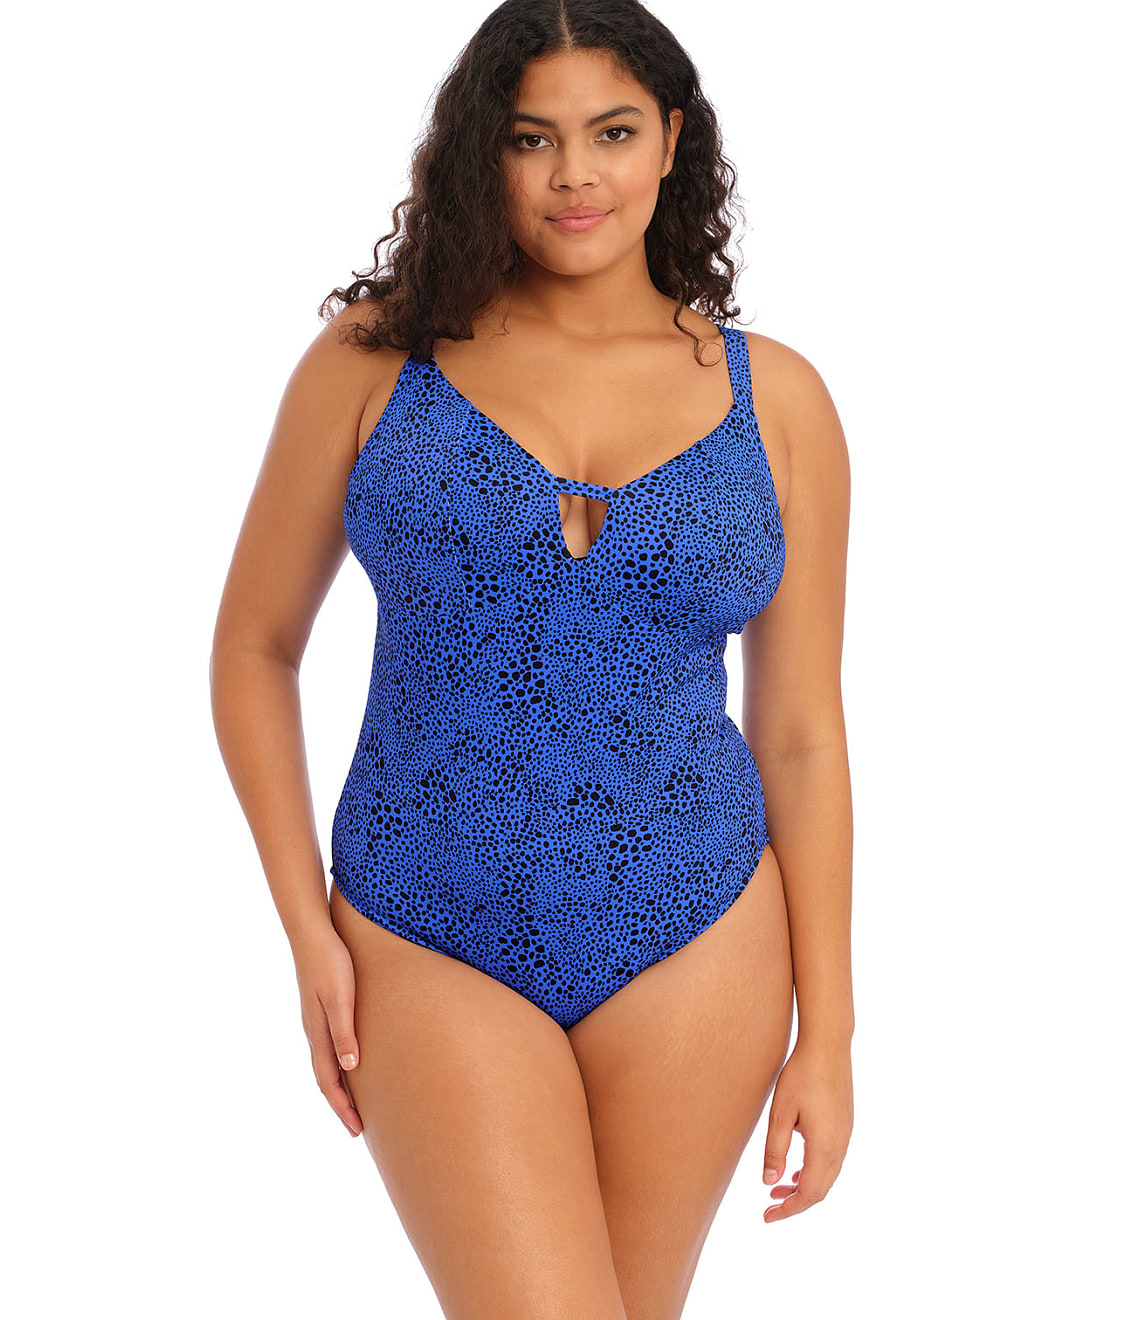 Swimsuits For All Women's Plus Size Bra Sized Sweetheart Underwire Tankini  Top 42 C Cool Blues